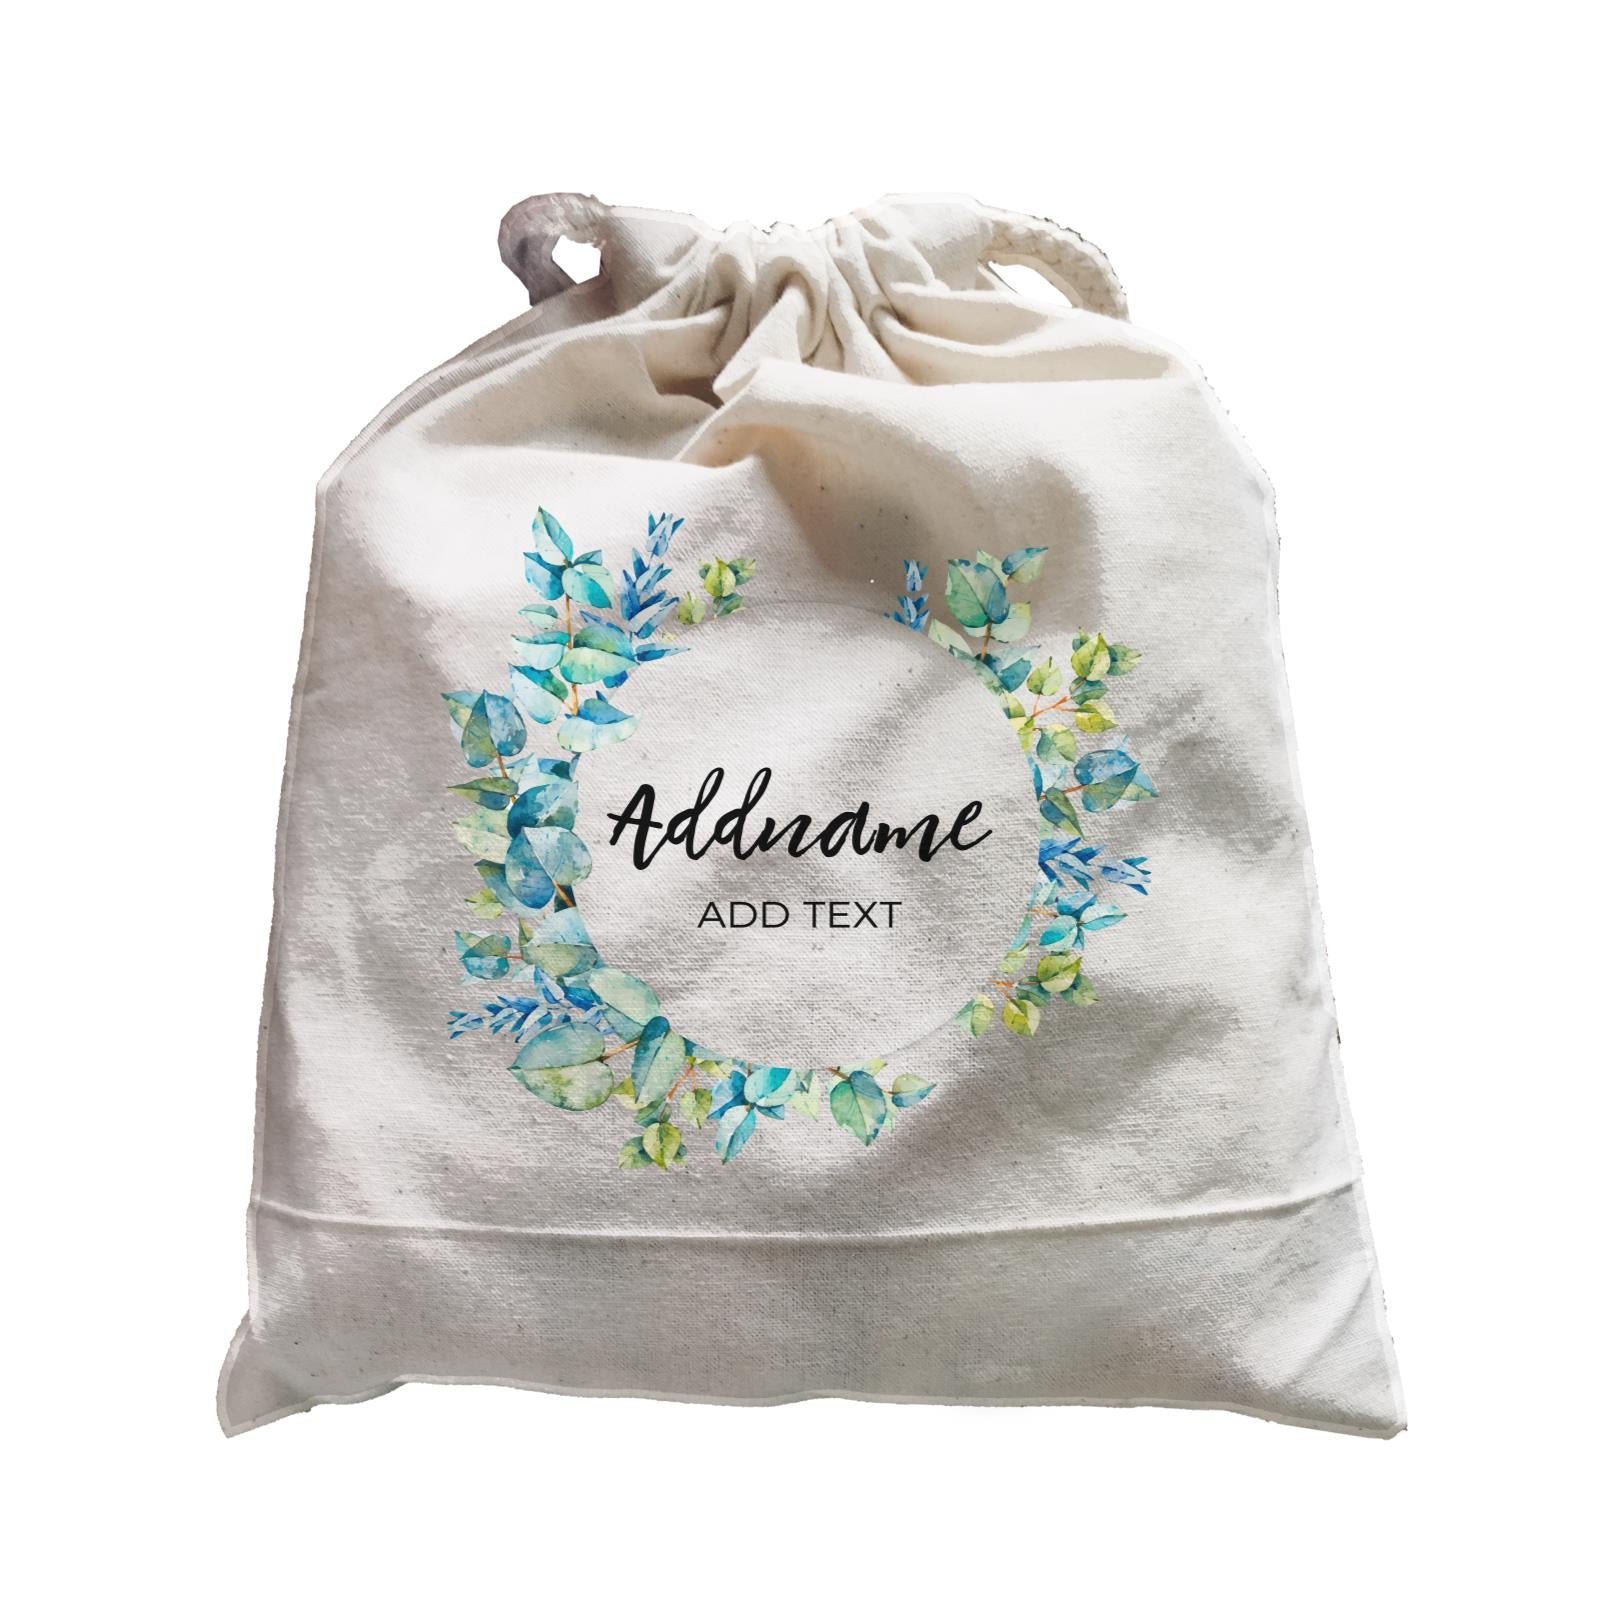 Add Your Own Text Teacher Blue Leaves Wreath Addname And Add Text Satchel